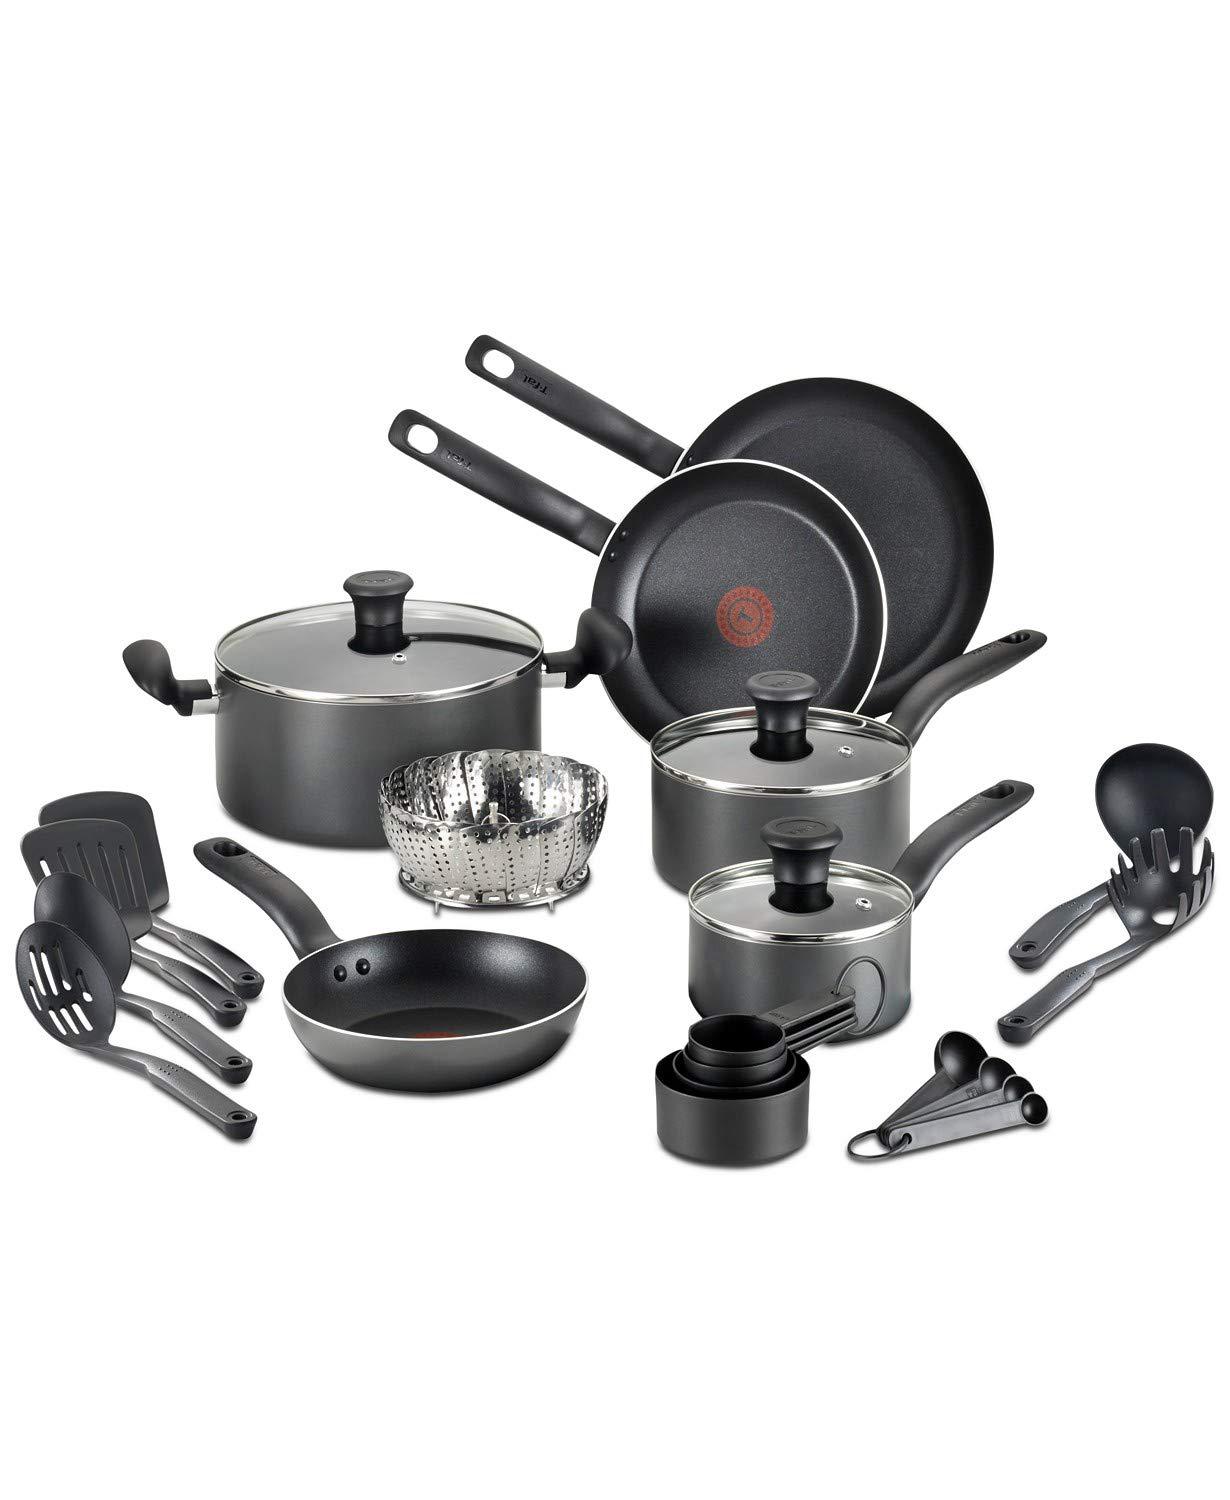 t-fal fba_a821si64 initiatives nonstick inside and out, 18-piece, black